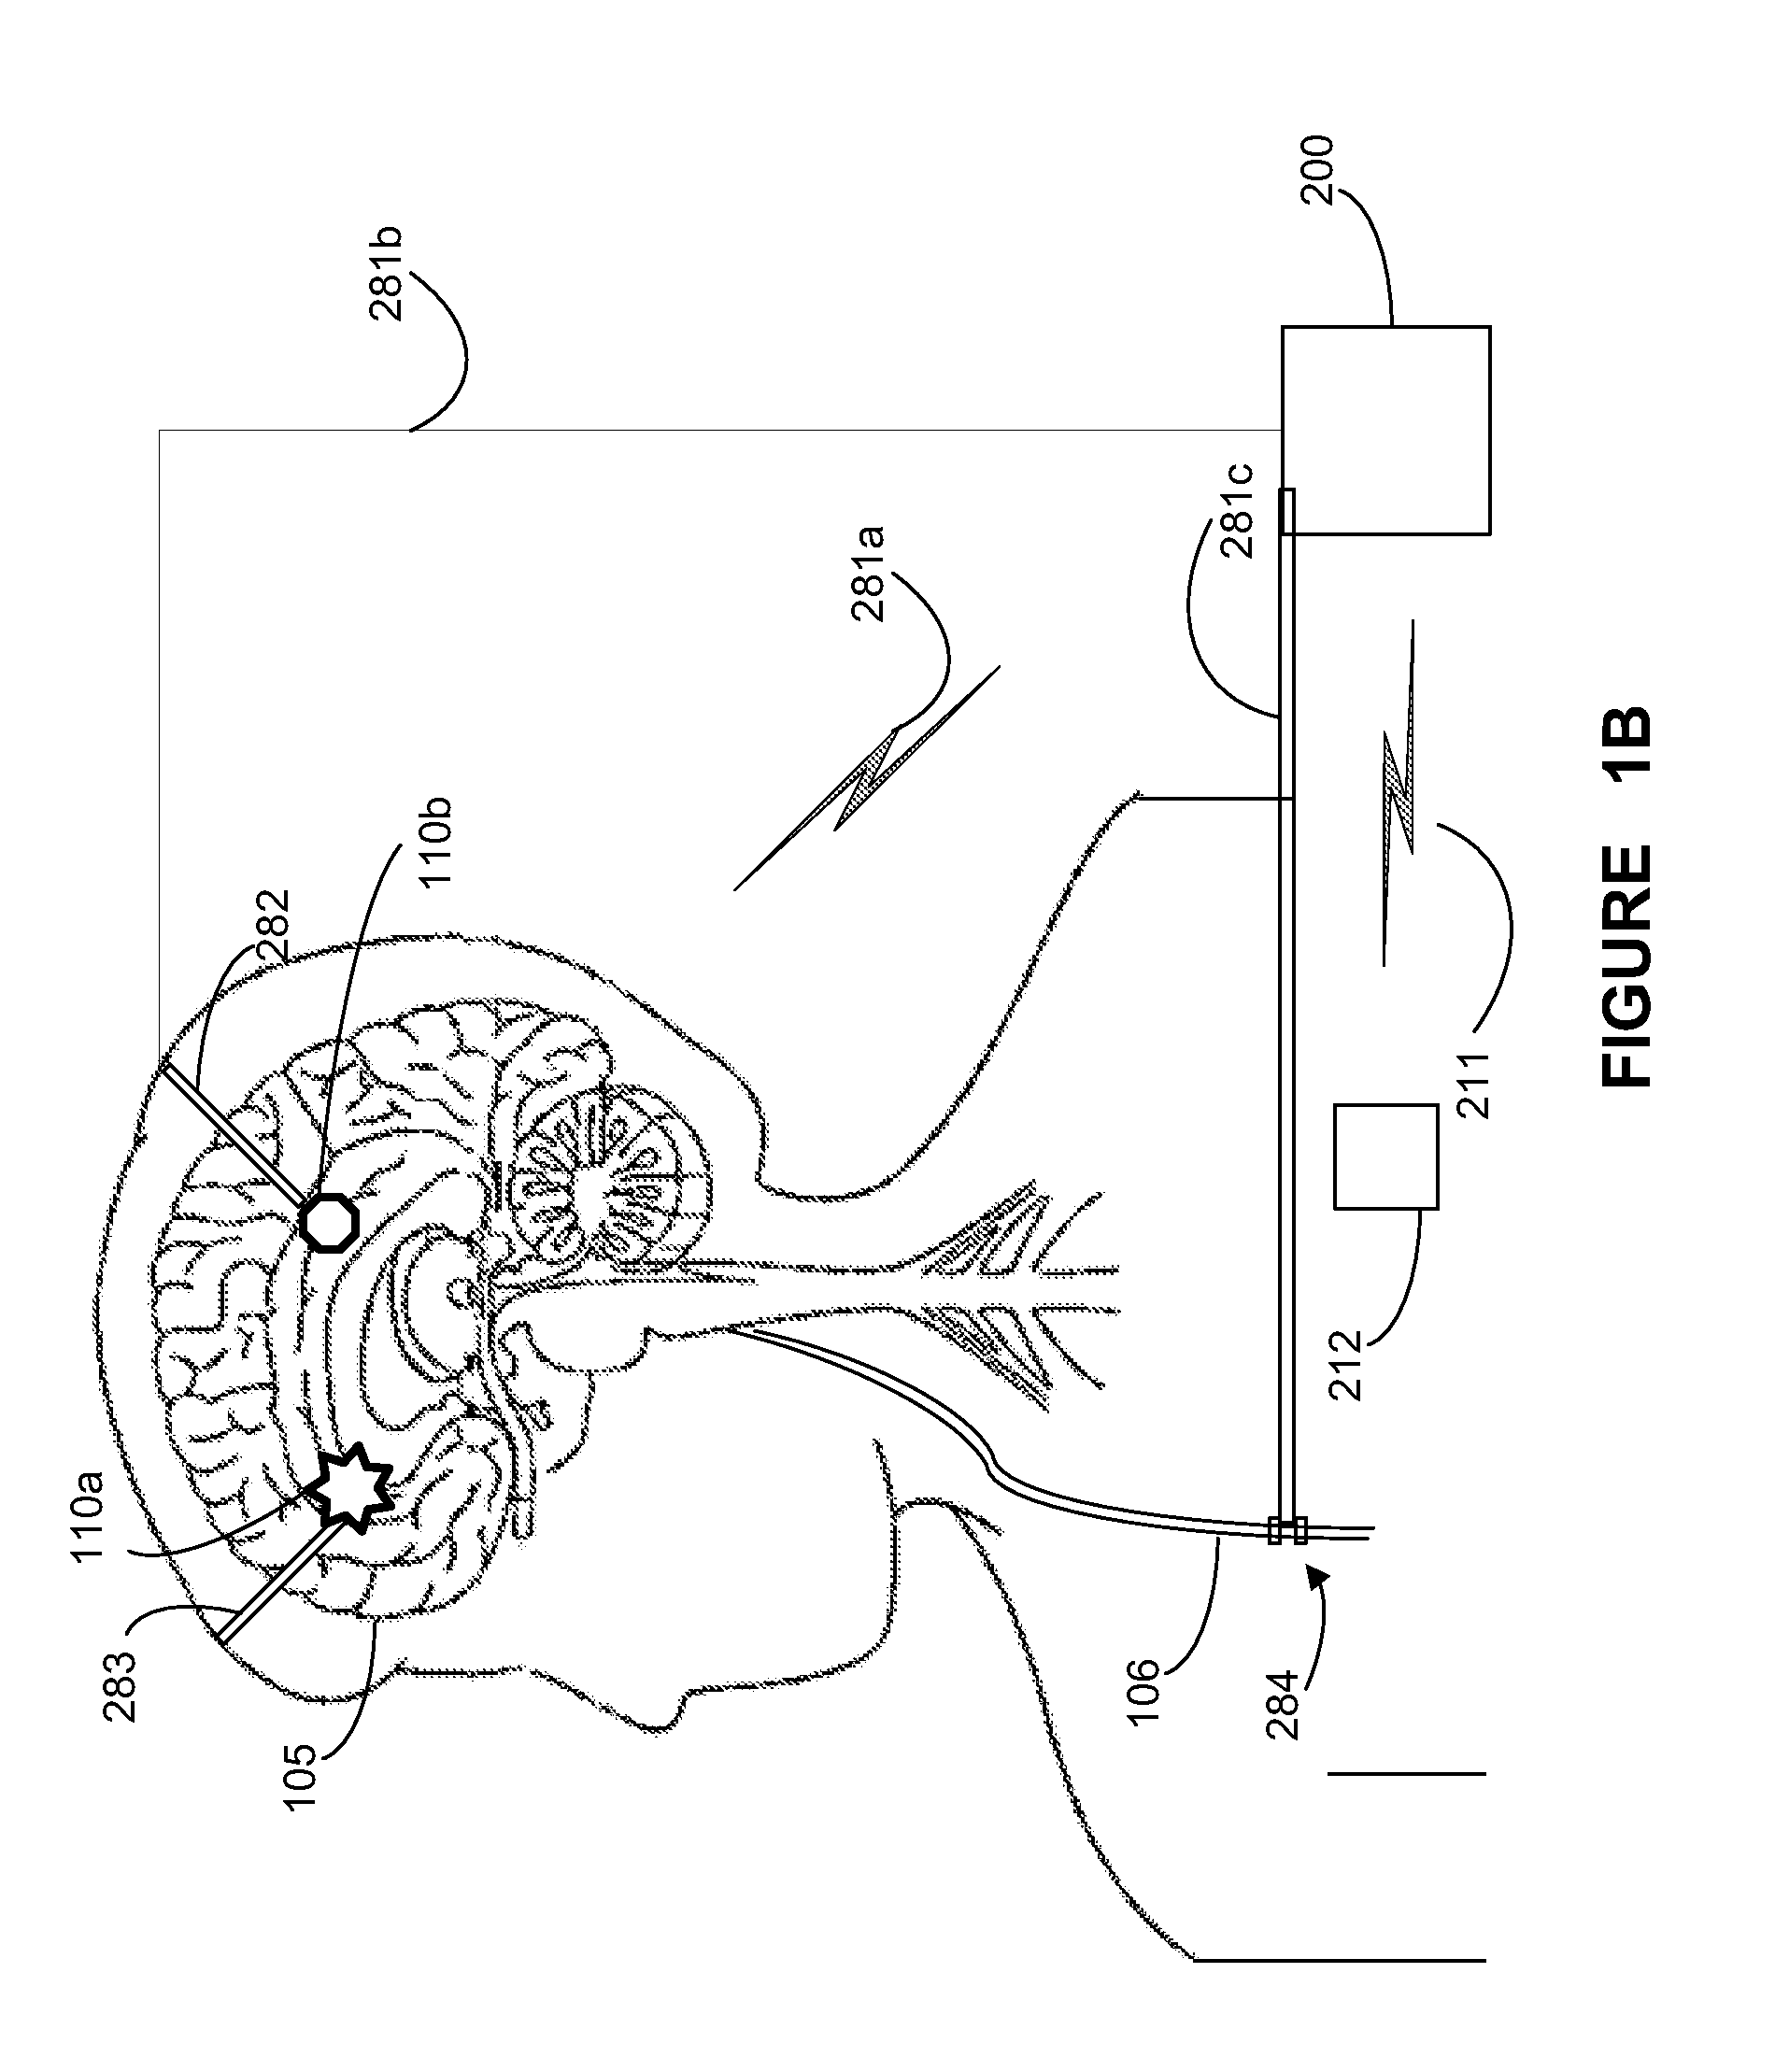 System and apparatus for increasing regularity and/or phase-locking of neuronal activity relating to an epileptic event